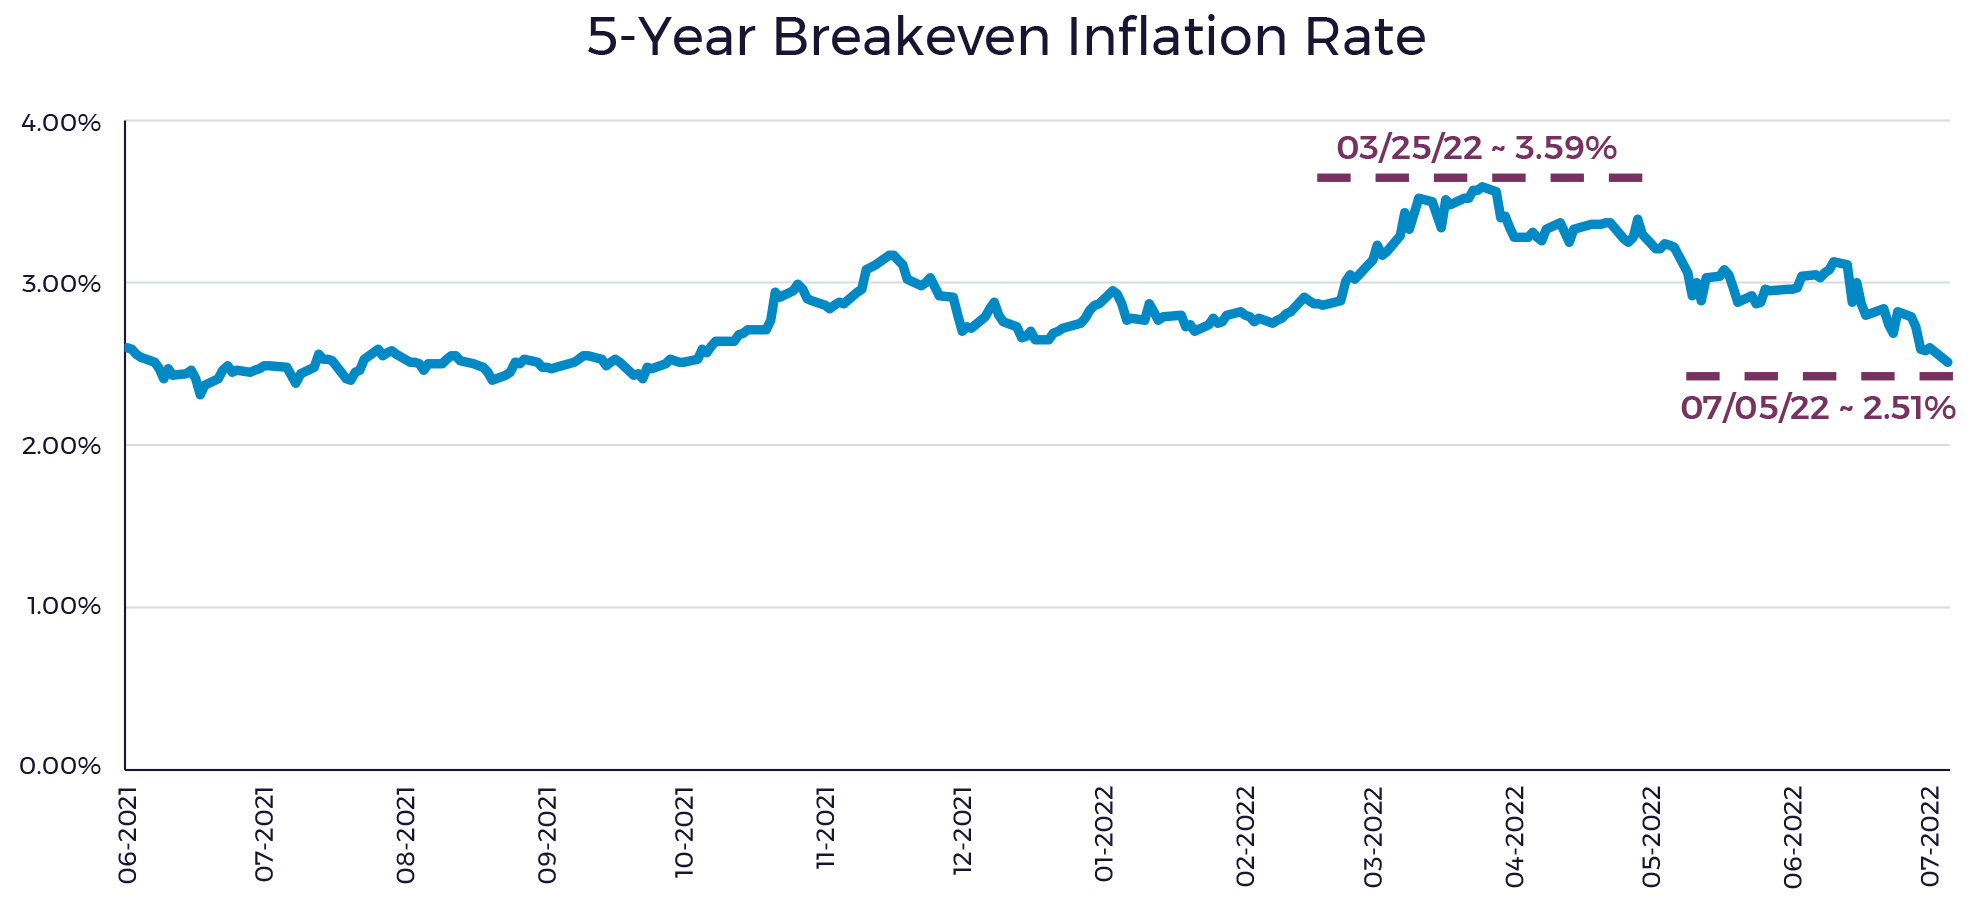 5-Year Breakeven Inflation Rate Graphic